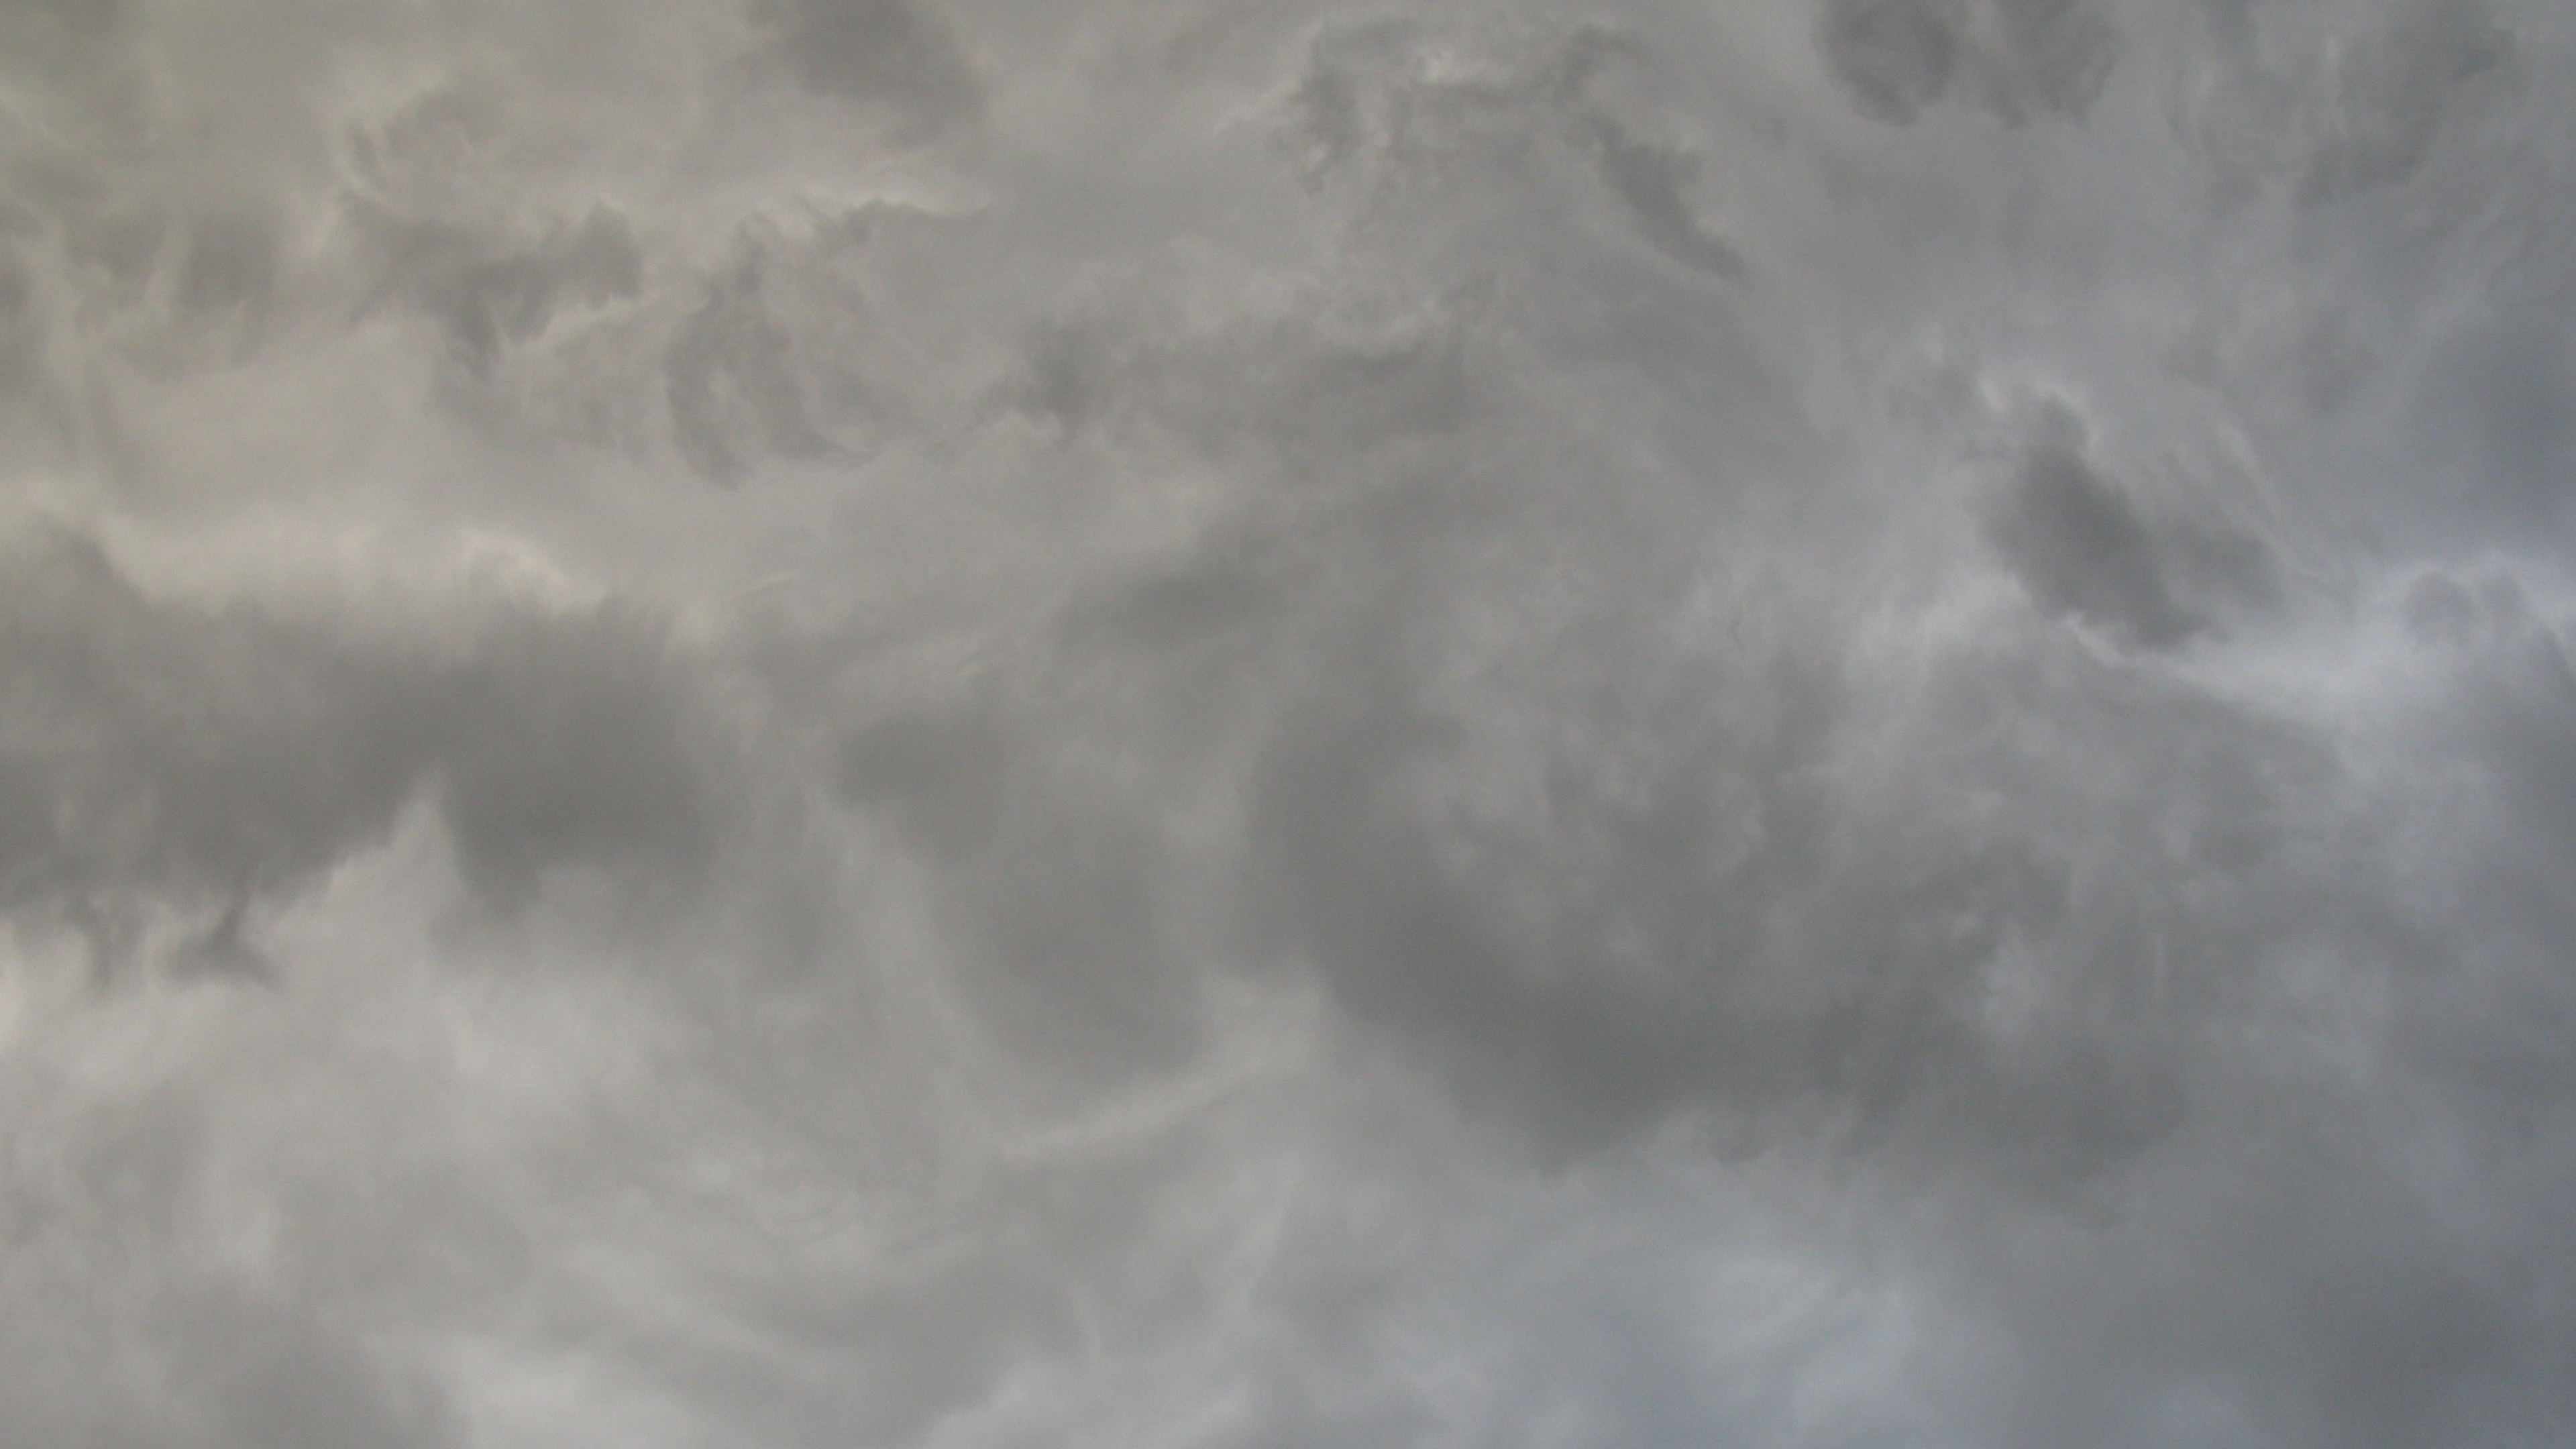 Gray Cloudy Sky: Skies tightly covered with clouds, Hazzy day, Gloomy weather. 3840x2160 4K Wallpaper.